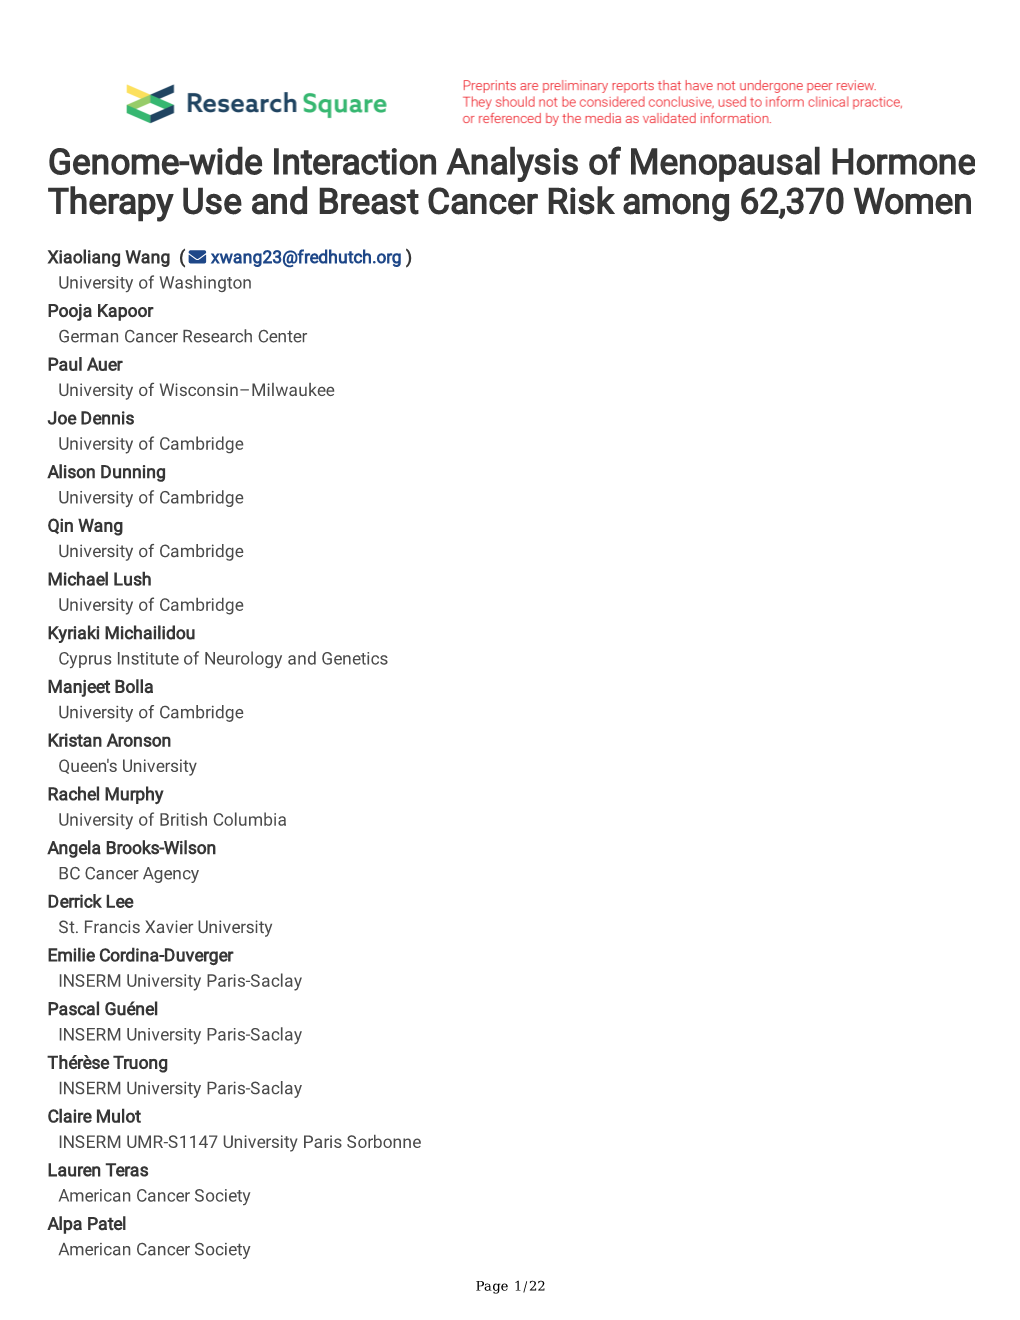 Genome-Wide Interaction Analysis of Menopausal Hormone Therapy Use and Breast Cancer Risk Among 62,370 Women